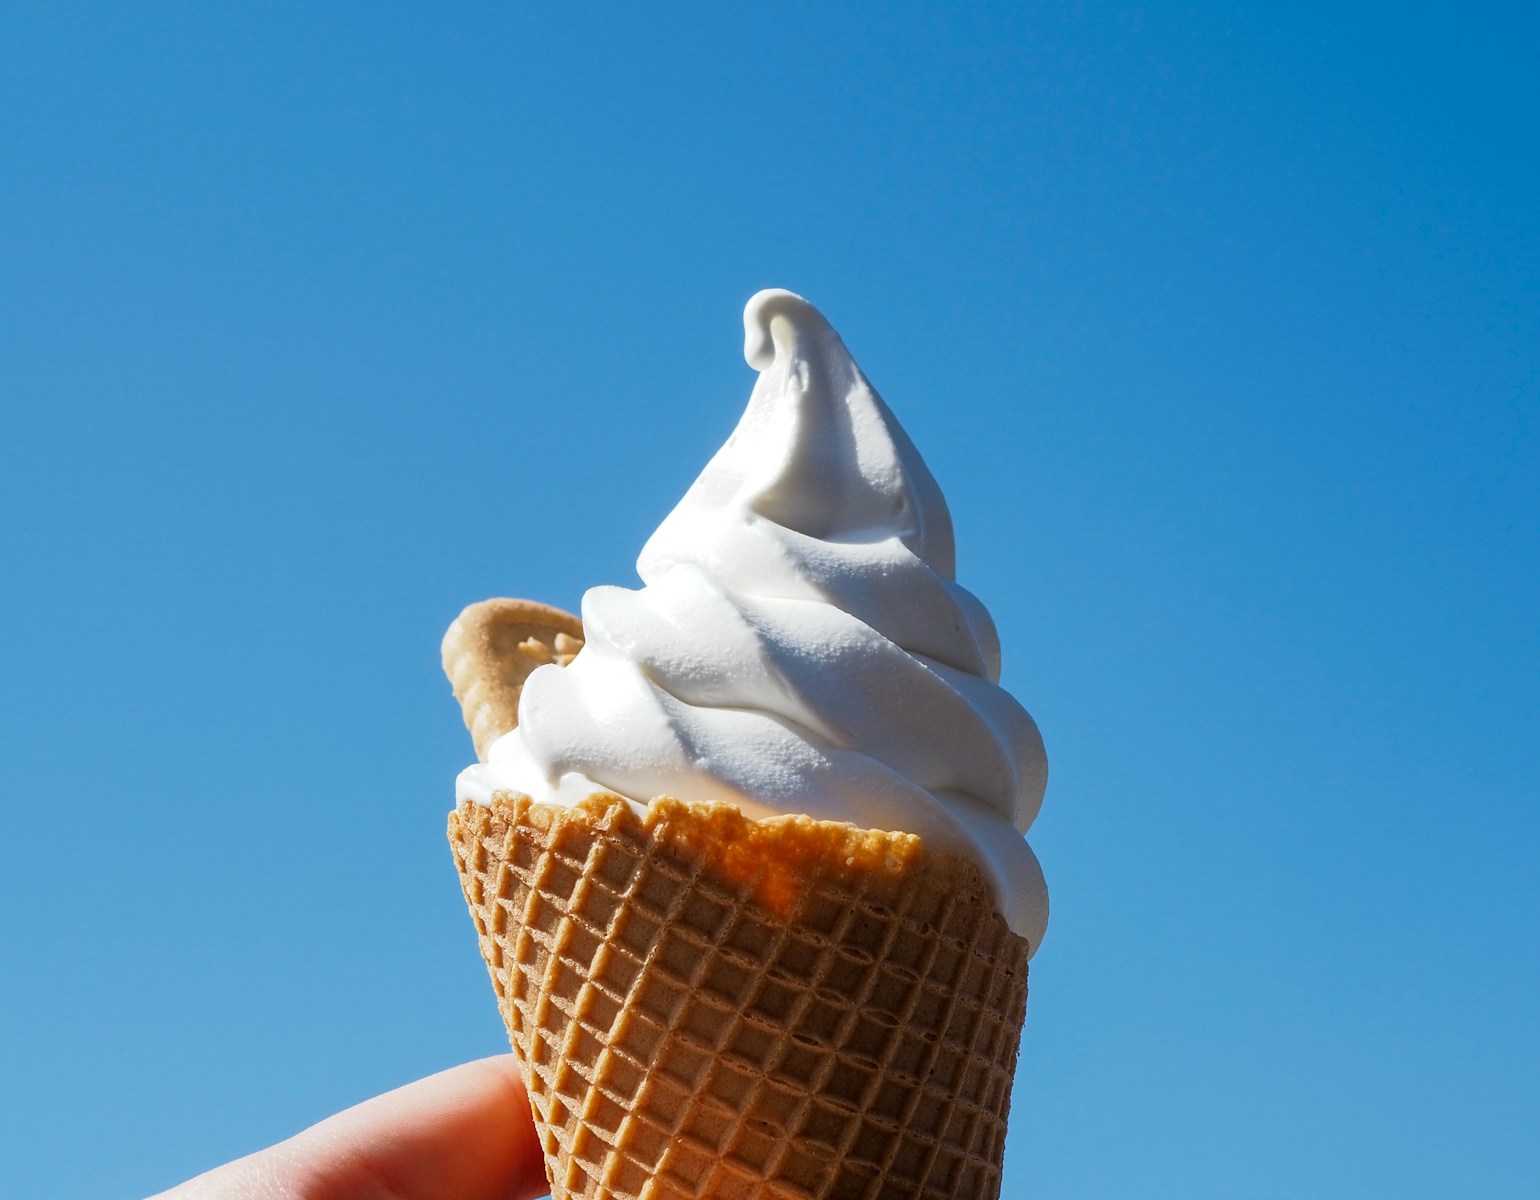 a hand holding an ice cream cone in front of a blue sky